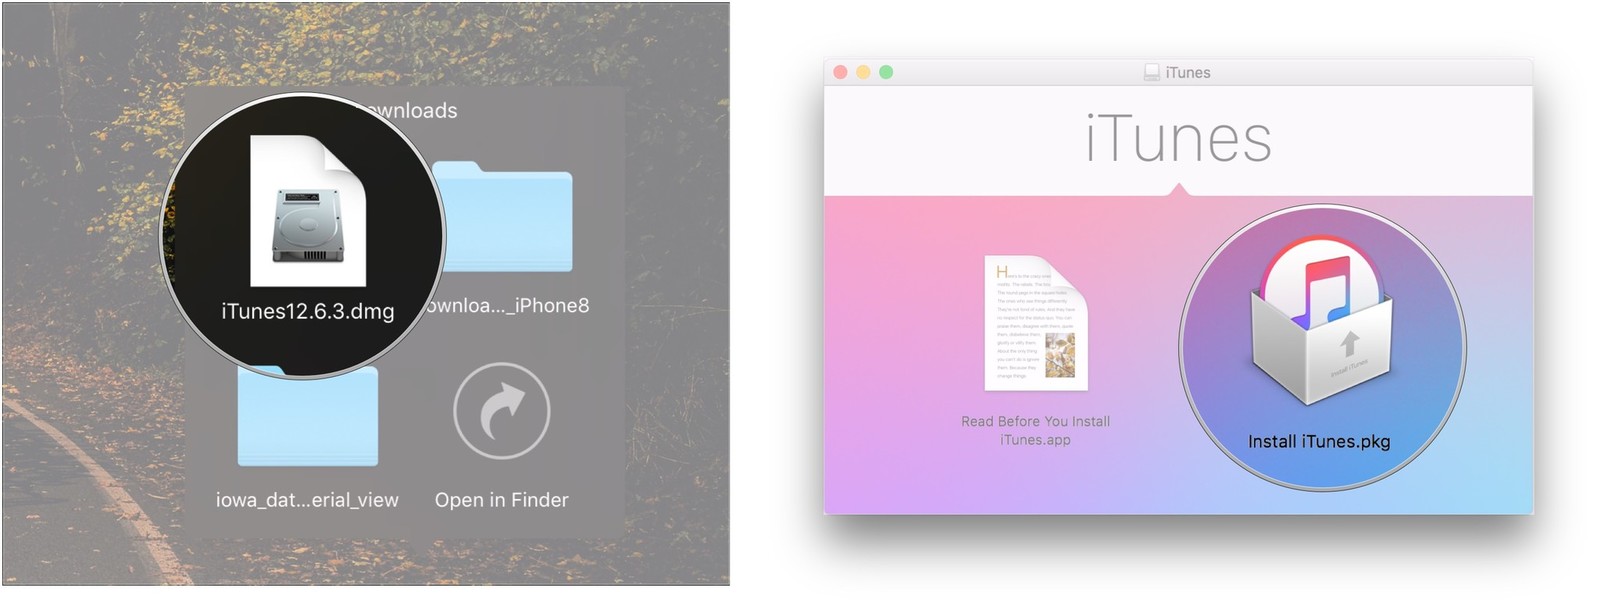 How To Install An App From Itunes On Mac